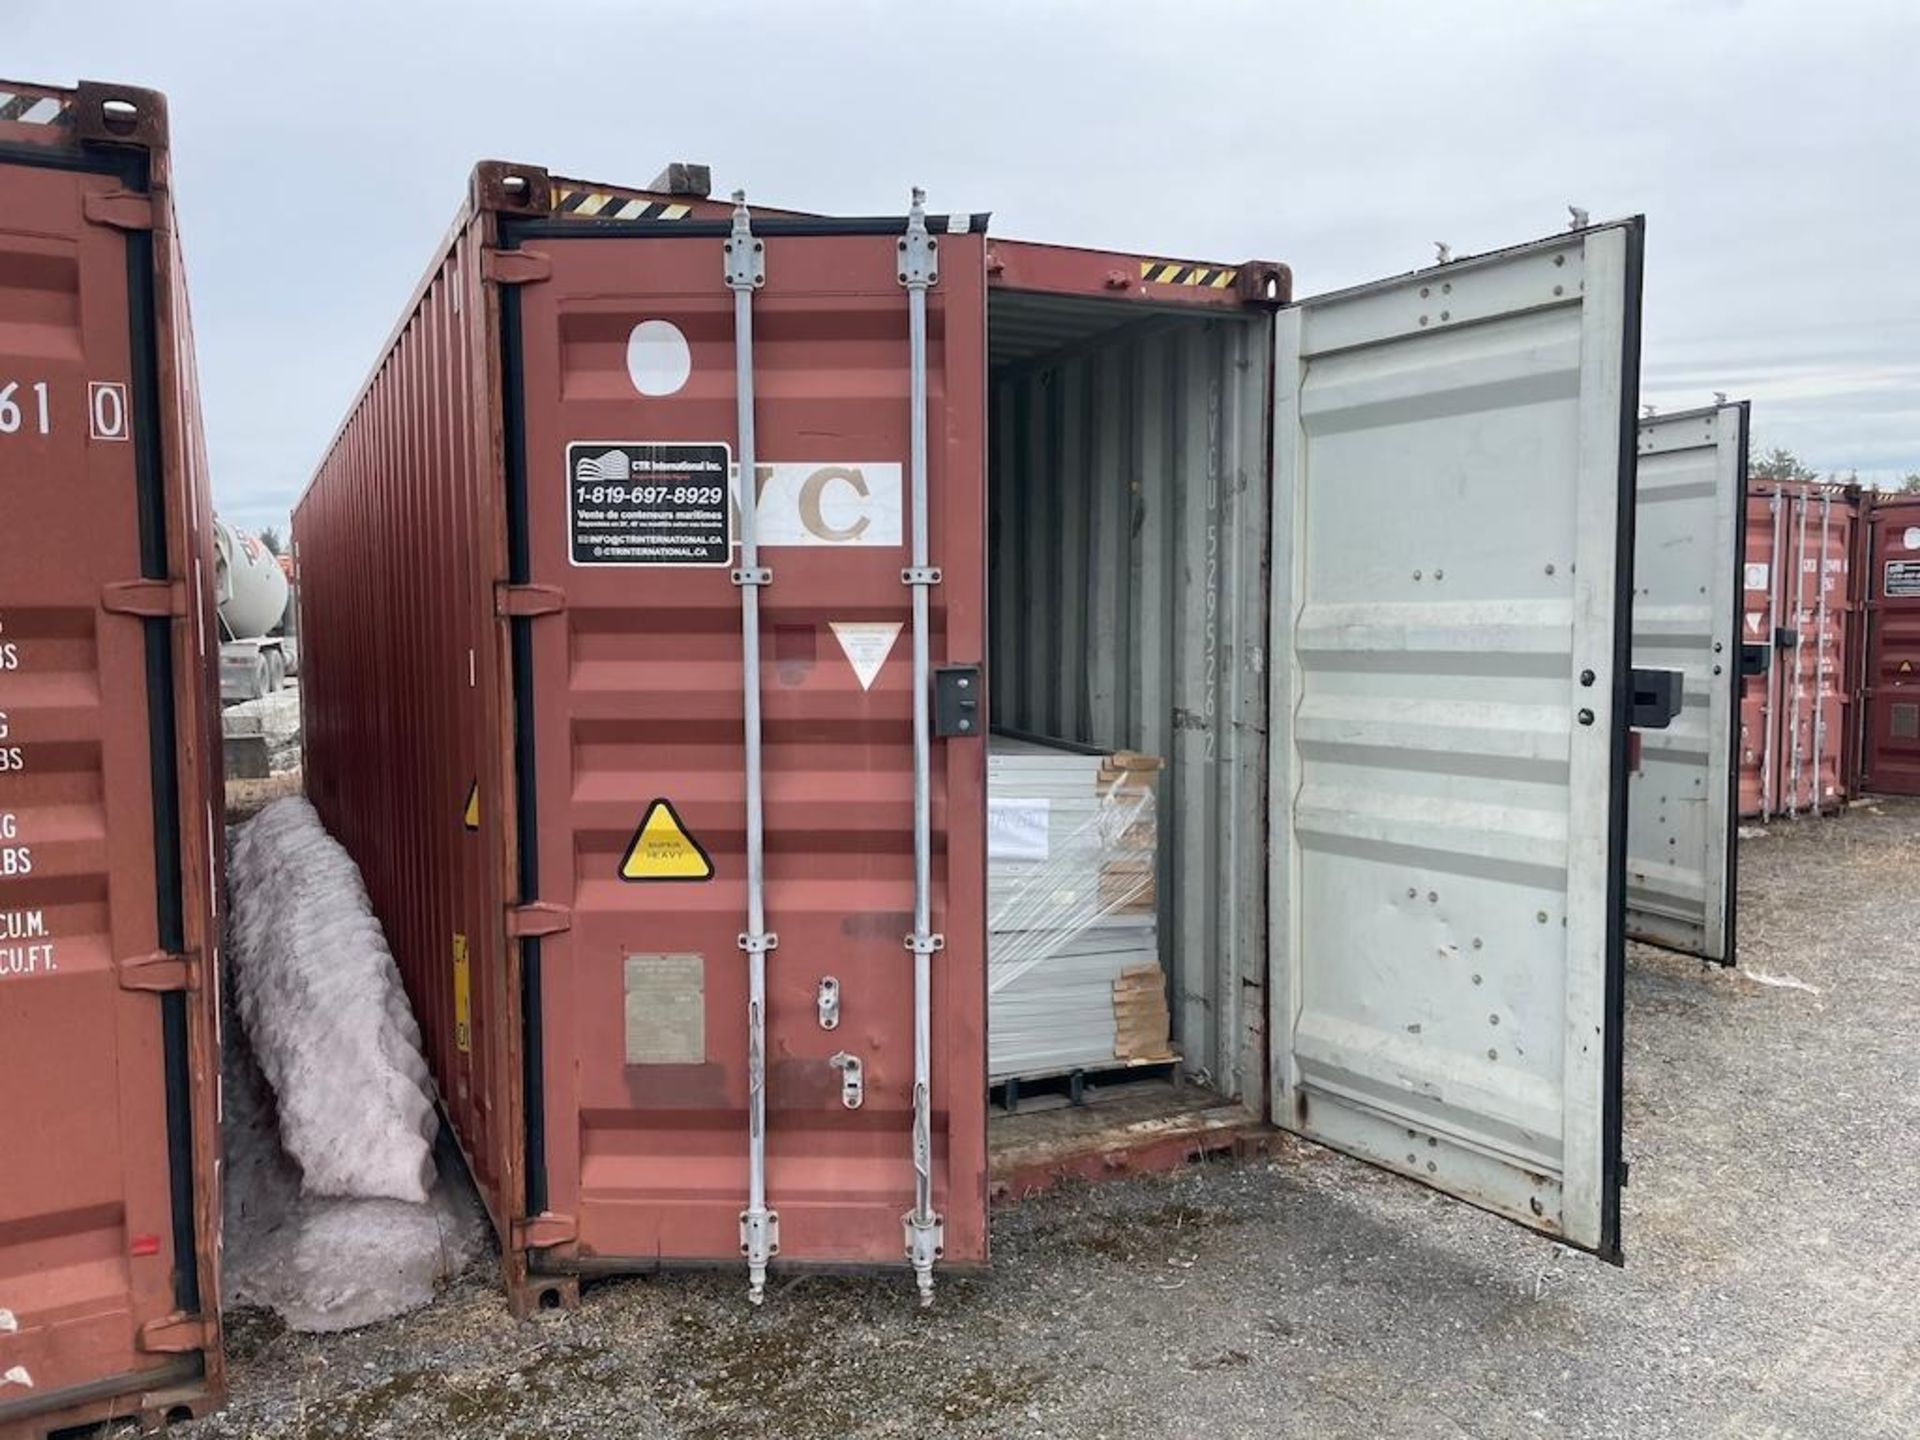 40 FT SEA CONTAINER, EXCLUDING CONTENTS, DELAYED PICK UP UNTIL MAY 13 [8] [TROIS RIVIERES] *PLEASE N